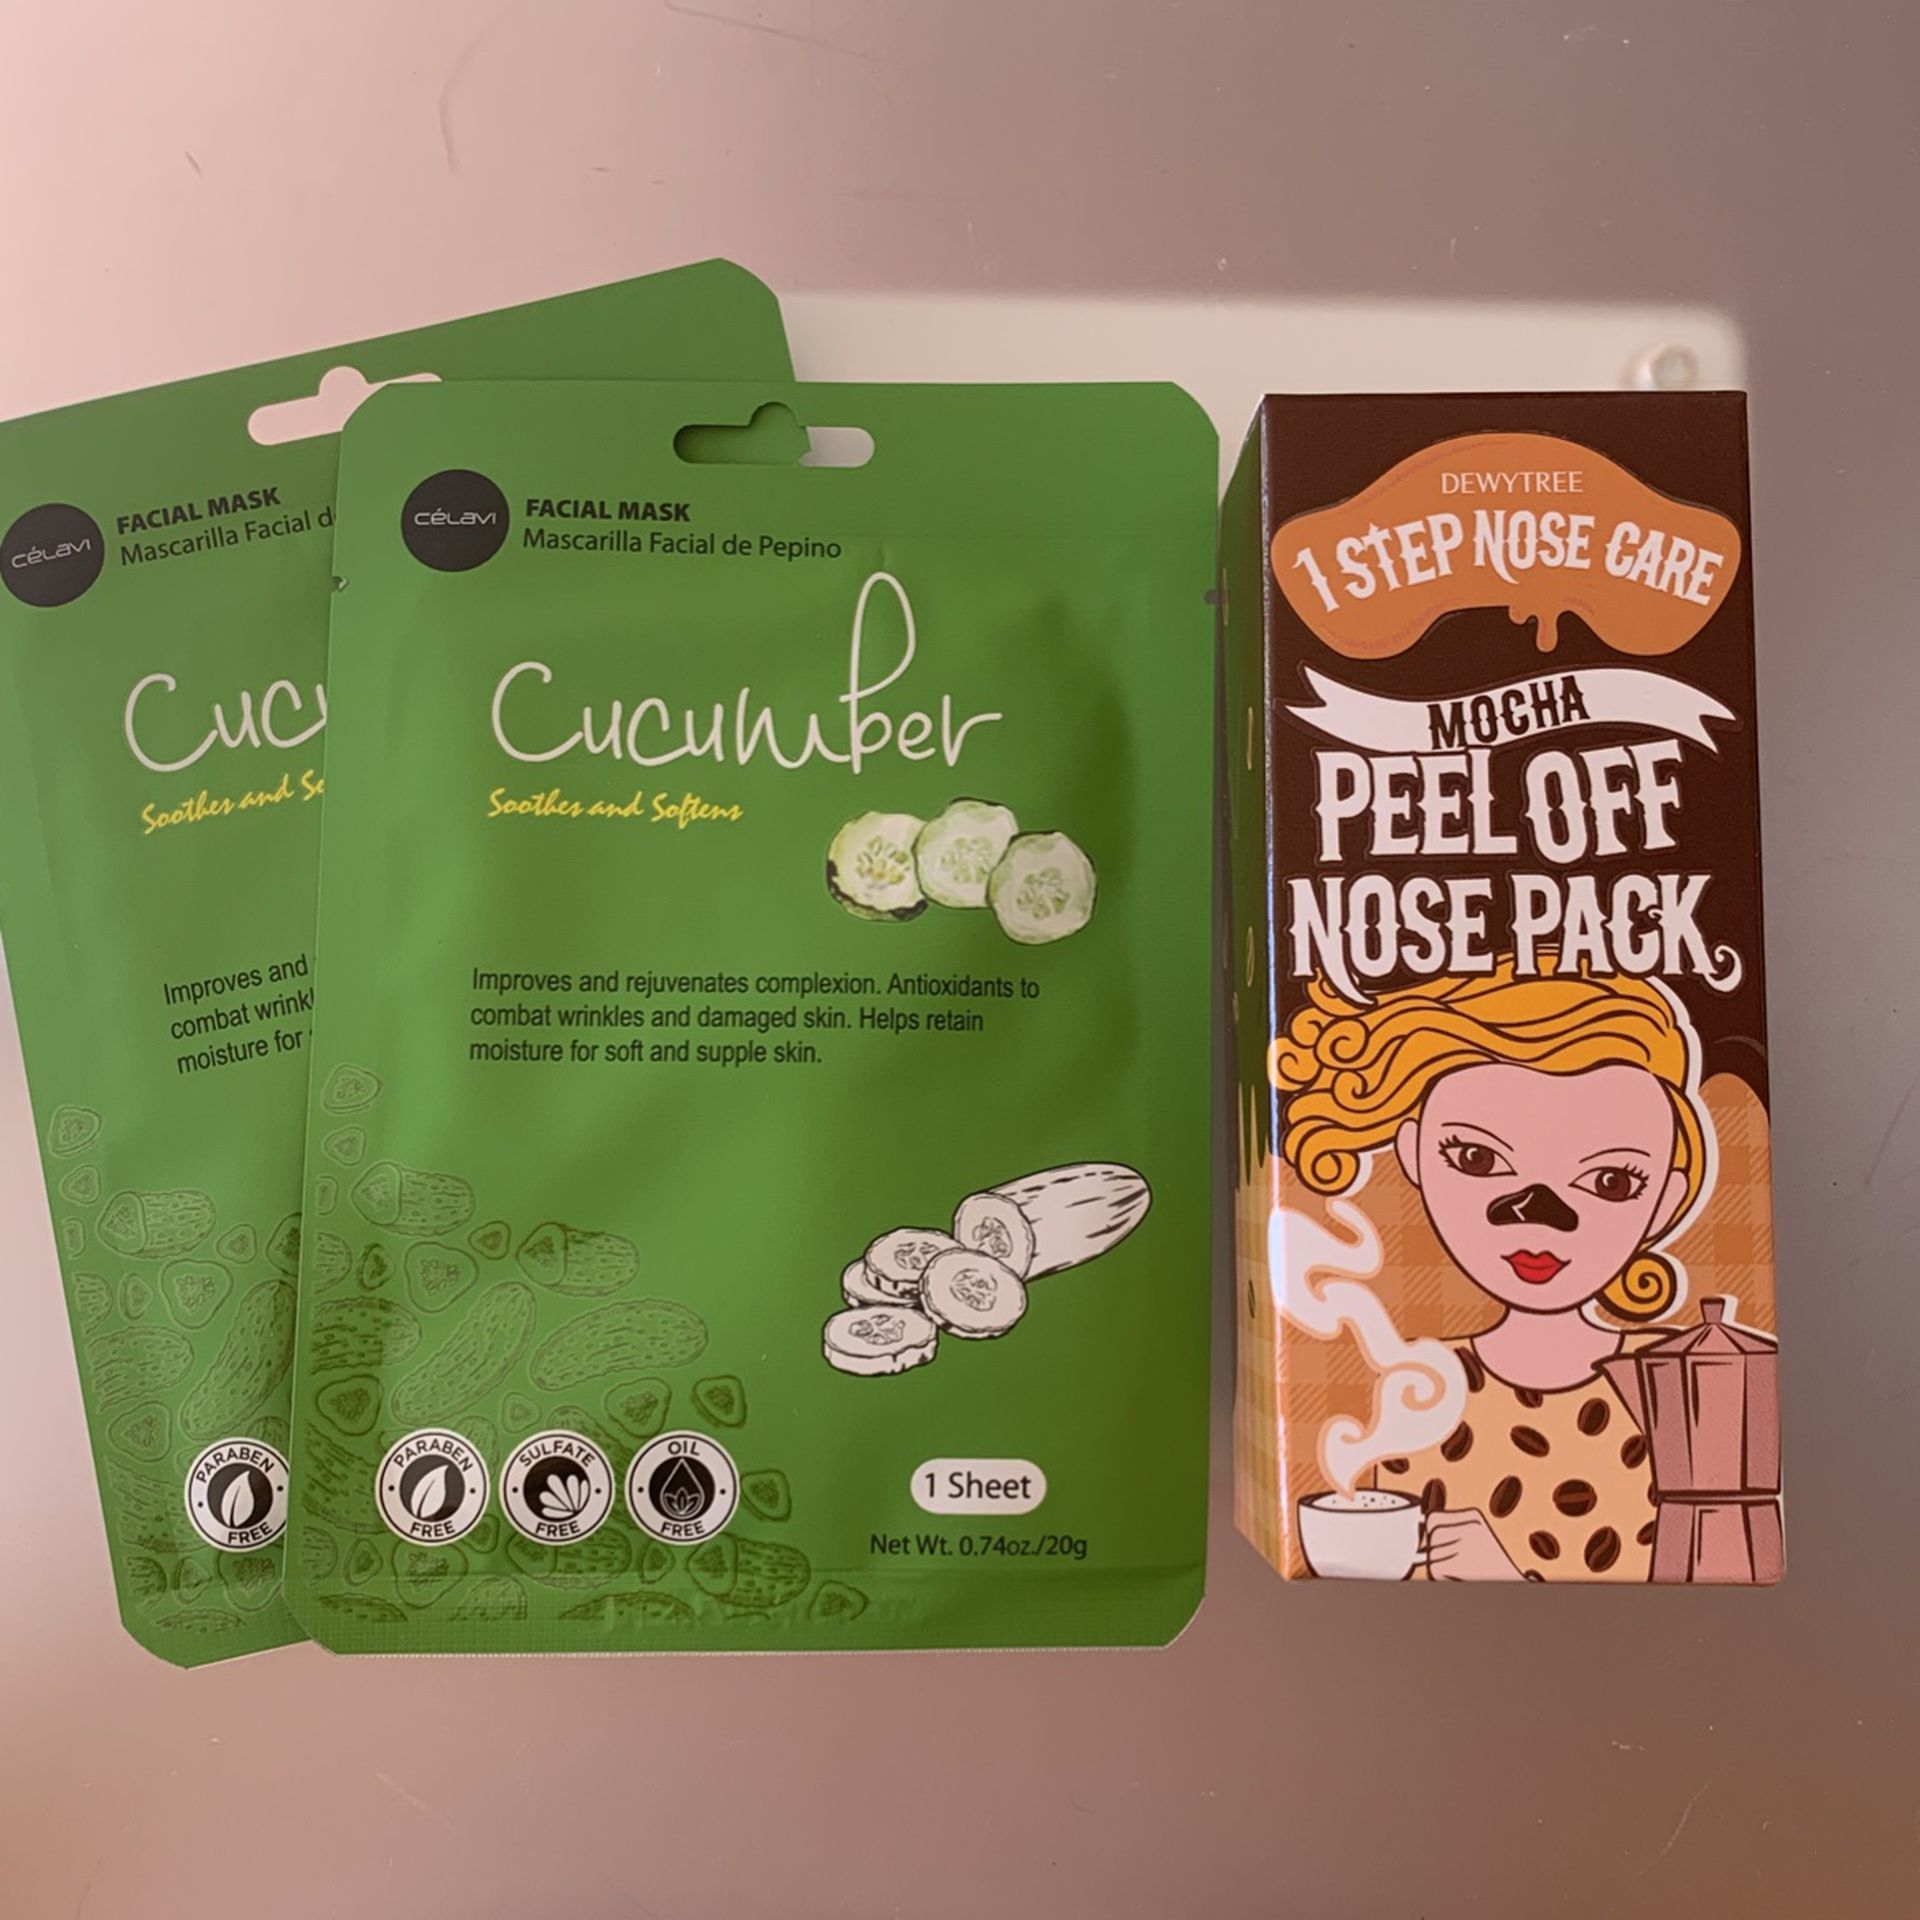 Brand New Mocha Peel Off Nose Pack And Cucumber Masks